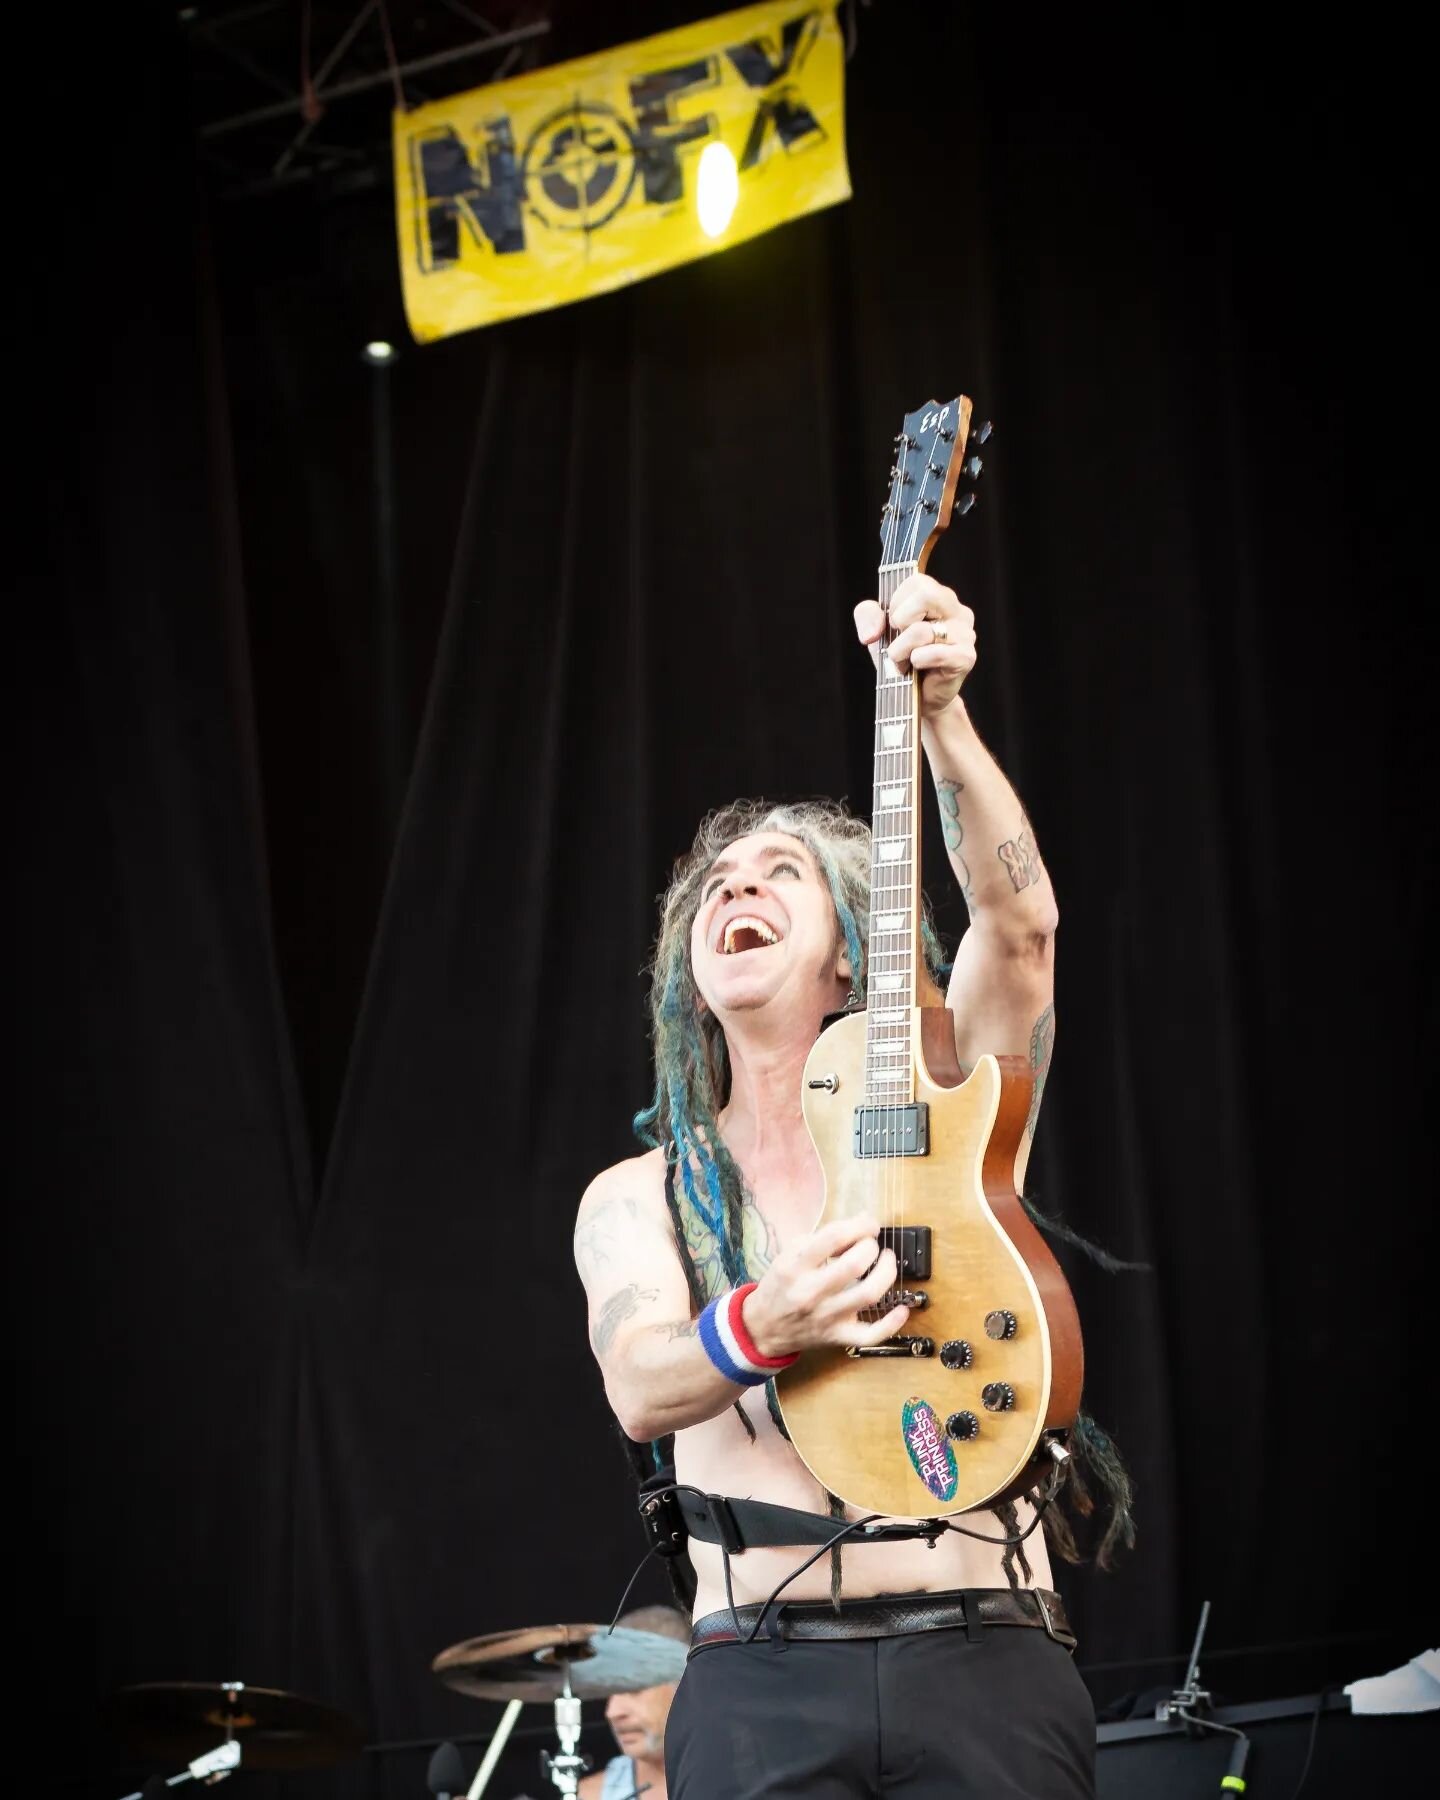 @nofx @ @goodthingsfestival 
Ph:@rollauro for @amnplify